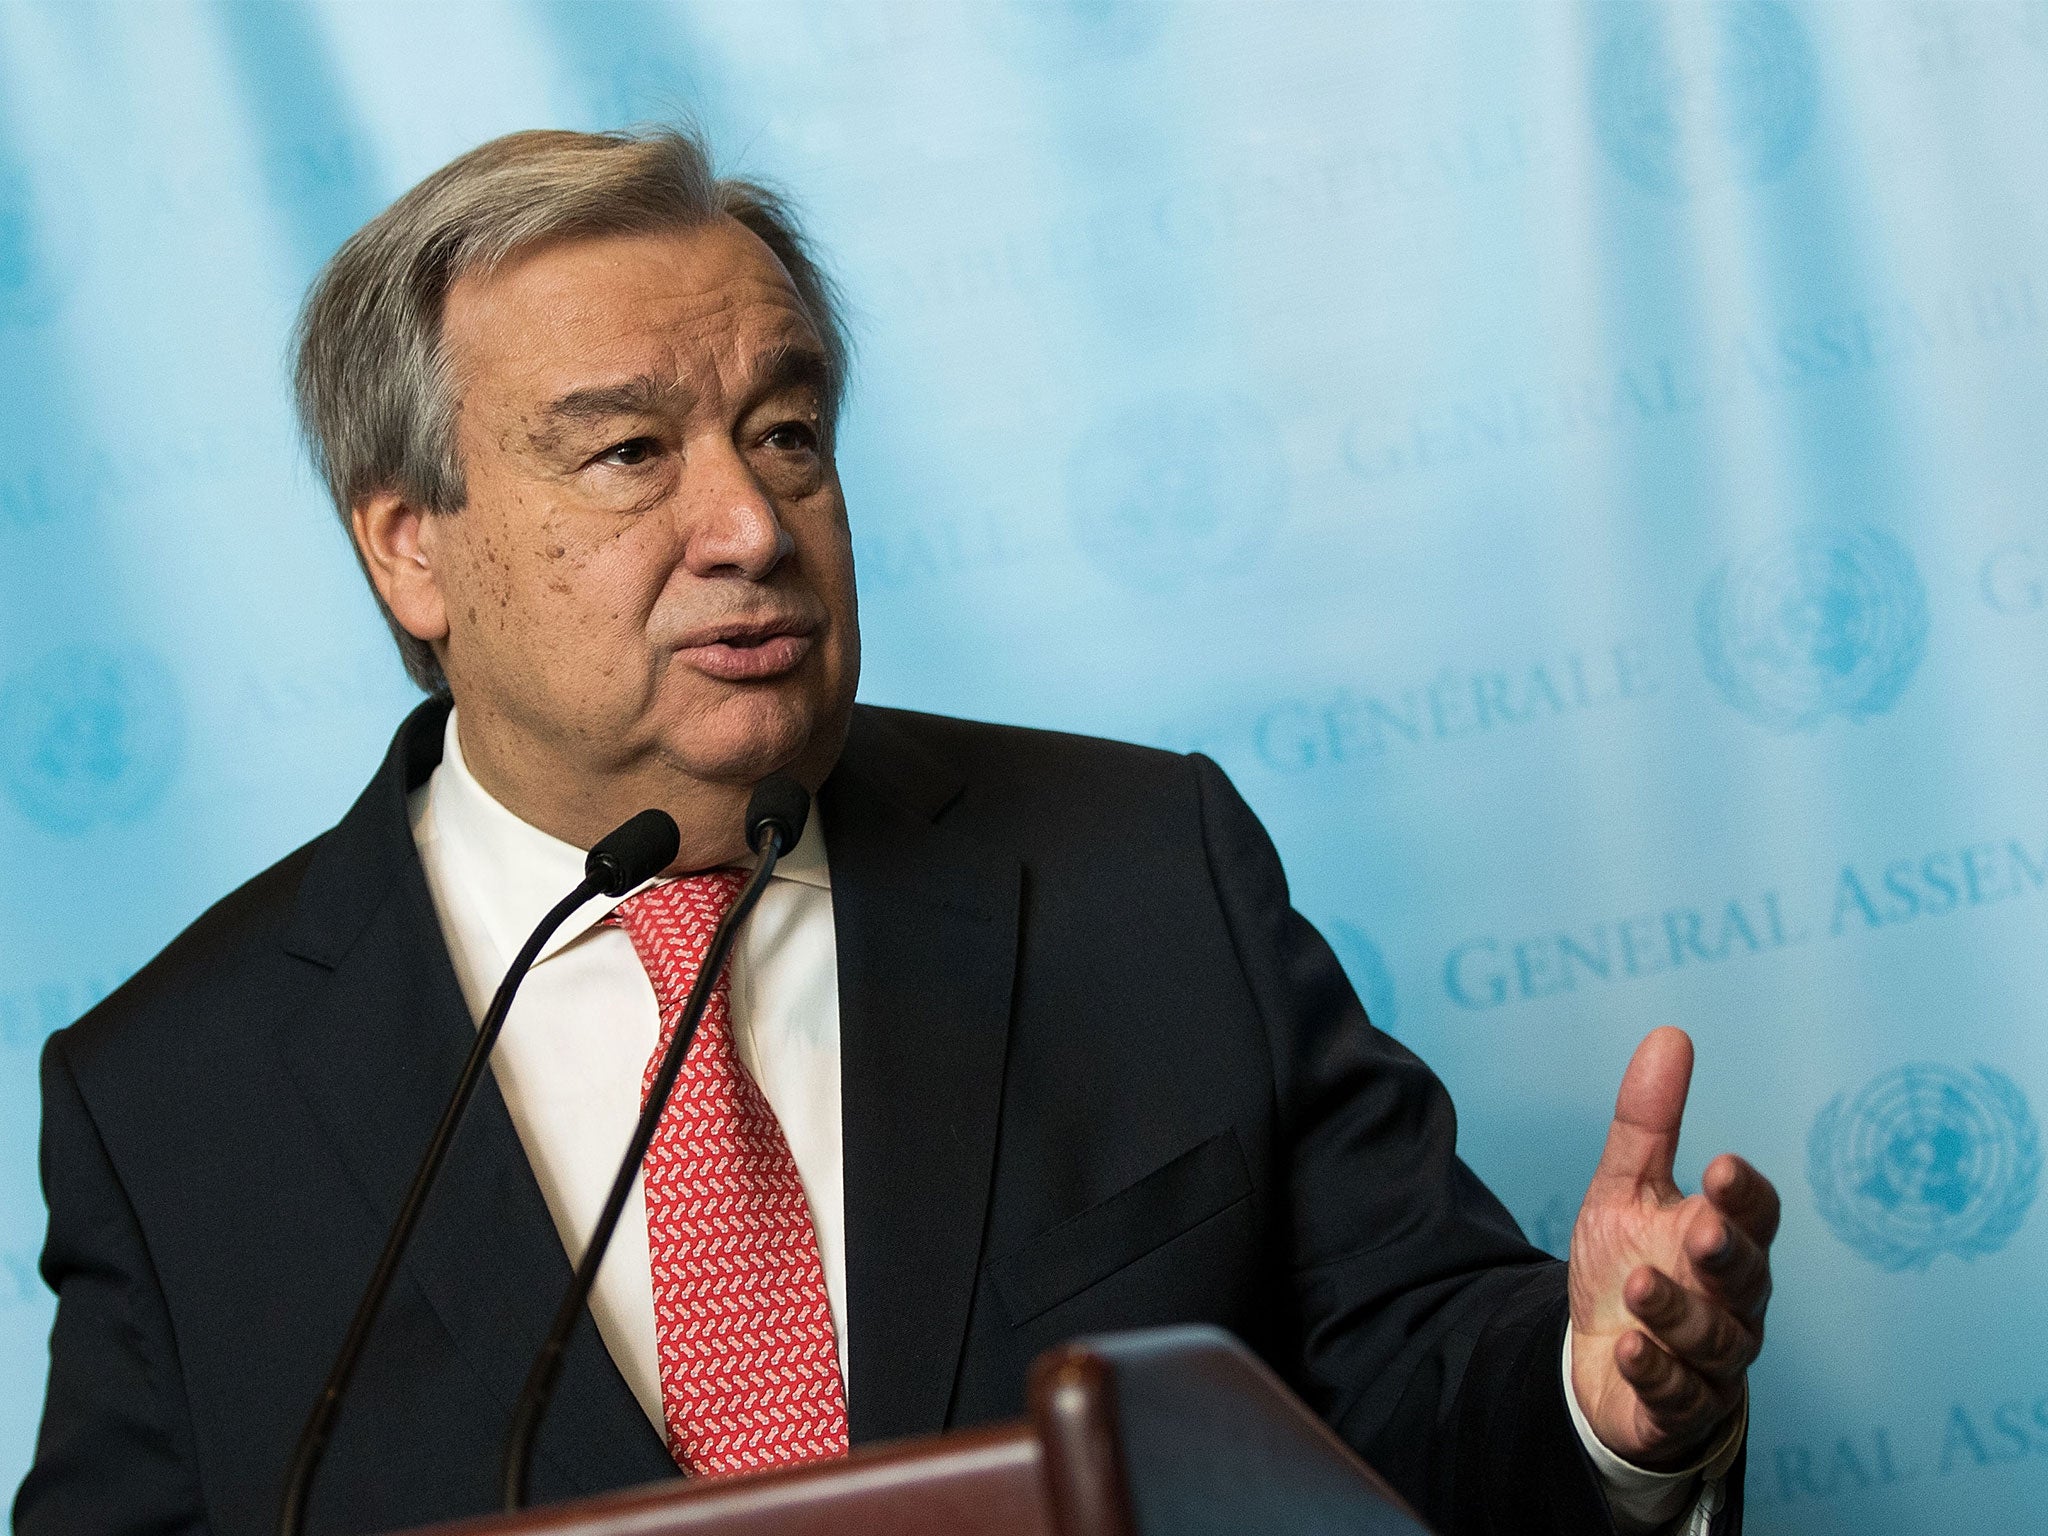 UN secretary-general Antonio Guterres: ‘The greater pain is felt by those we serve when we cannot, for want of modest funds, answer their call for help’